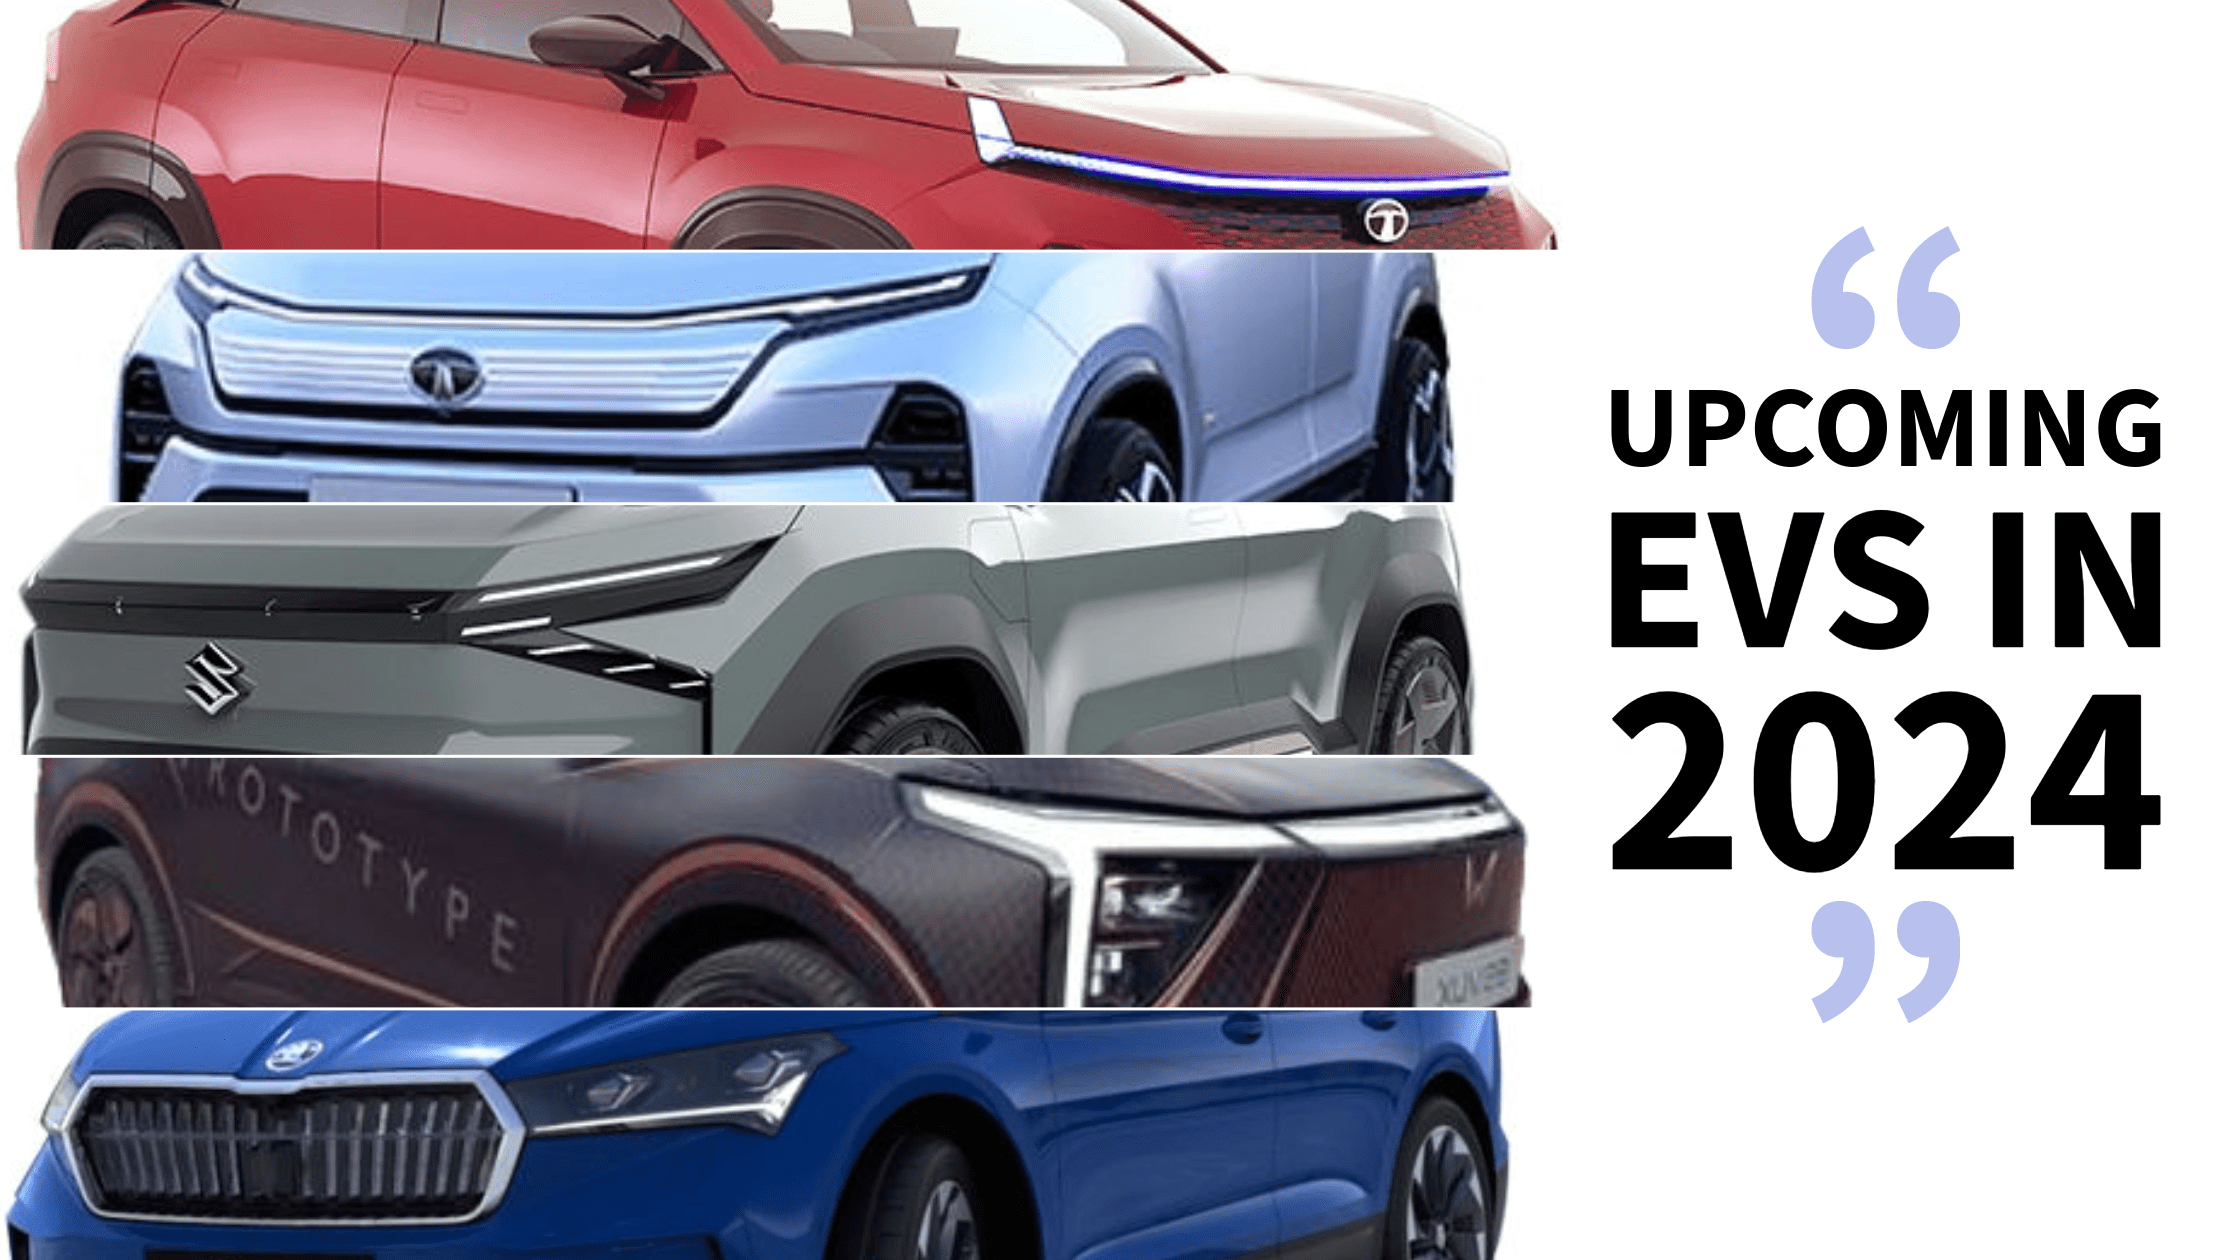 You are currently viewing Upcoming EVs in 2024 From Tata Curvv EV to Skoda Enyaq, these 5 amazing EVs will be launched this year